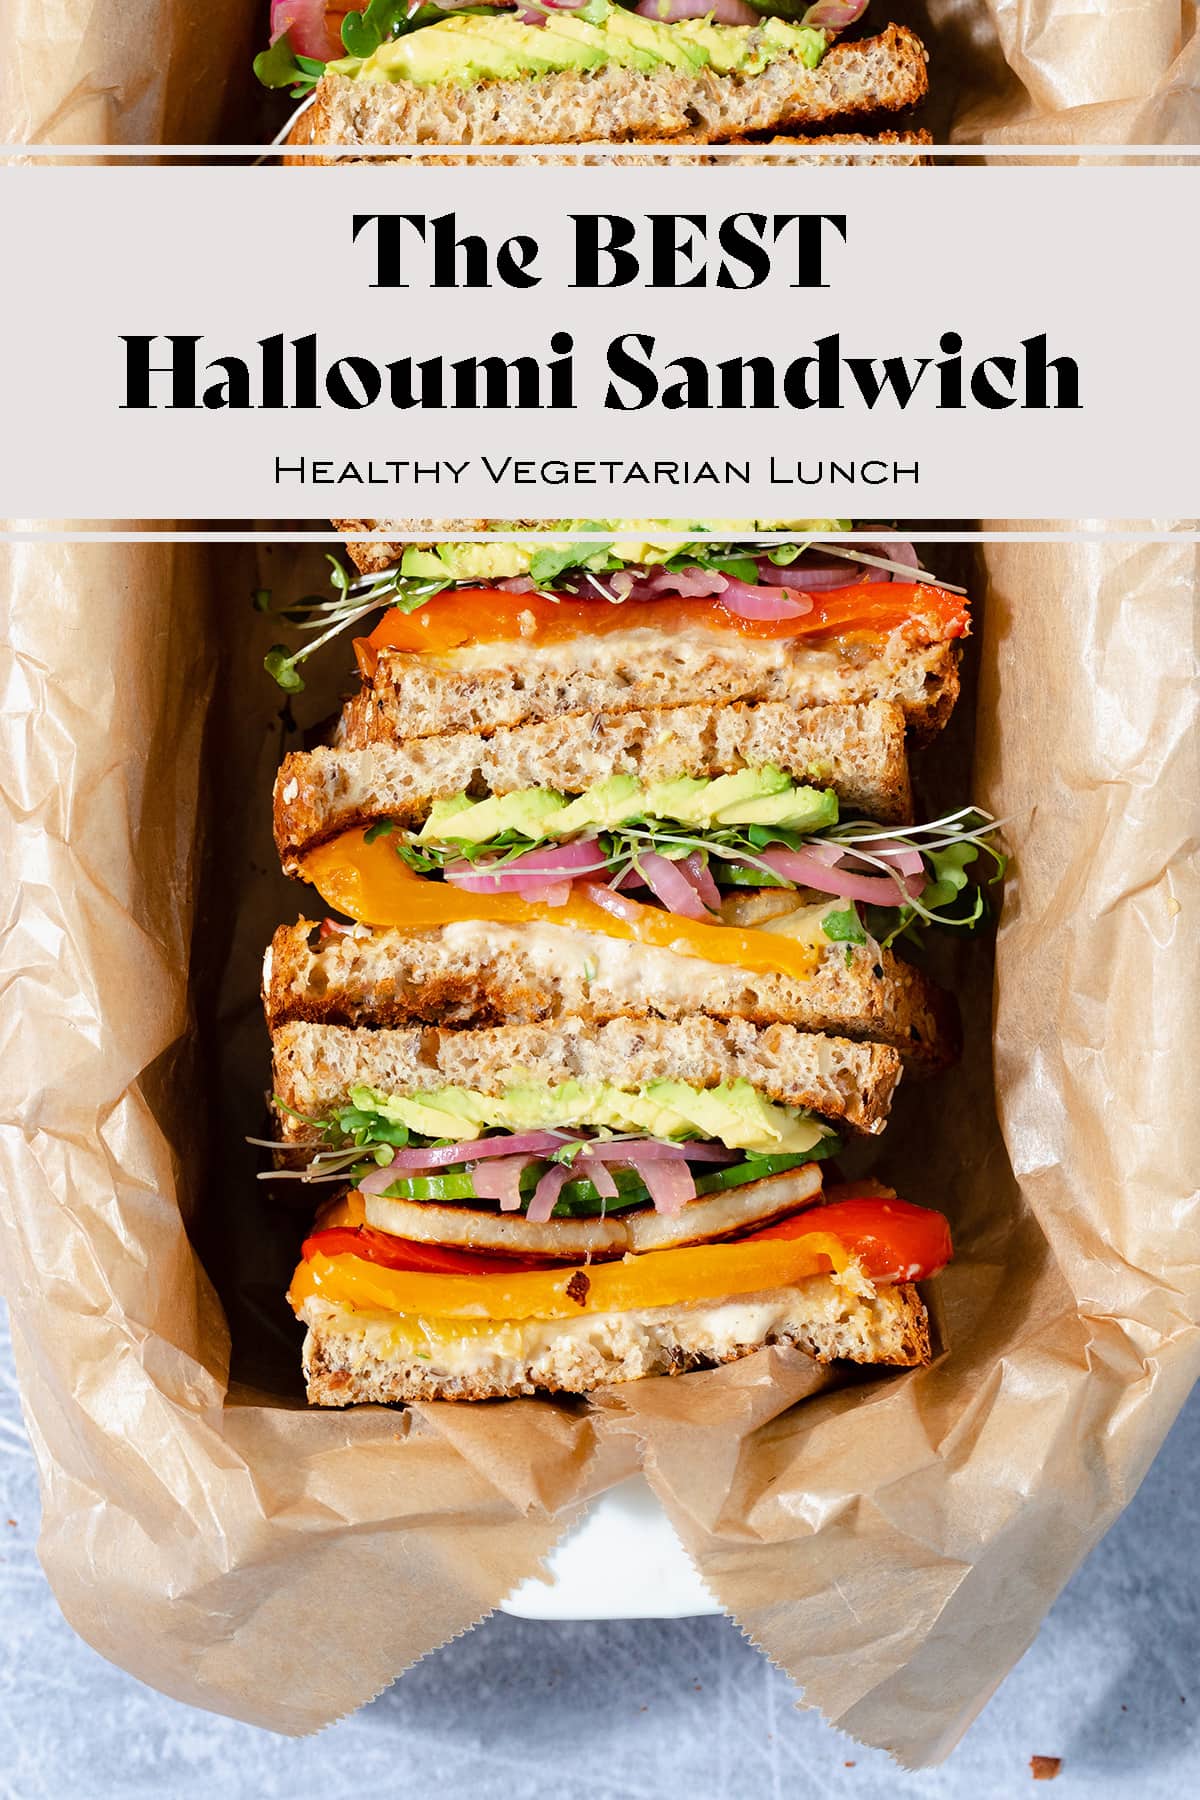 Halloumi Sandwich with Roasted Vegetables